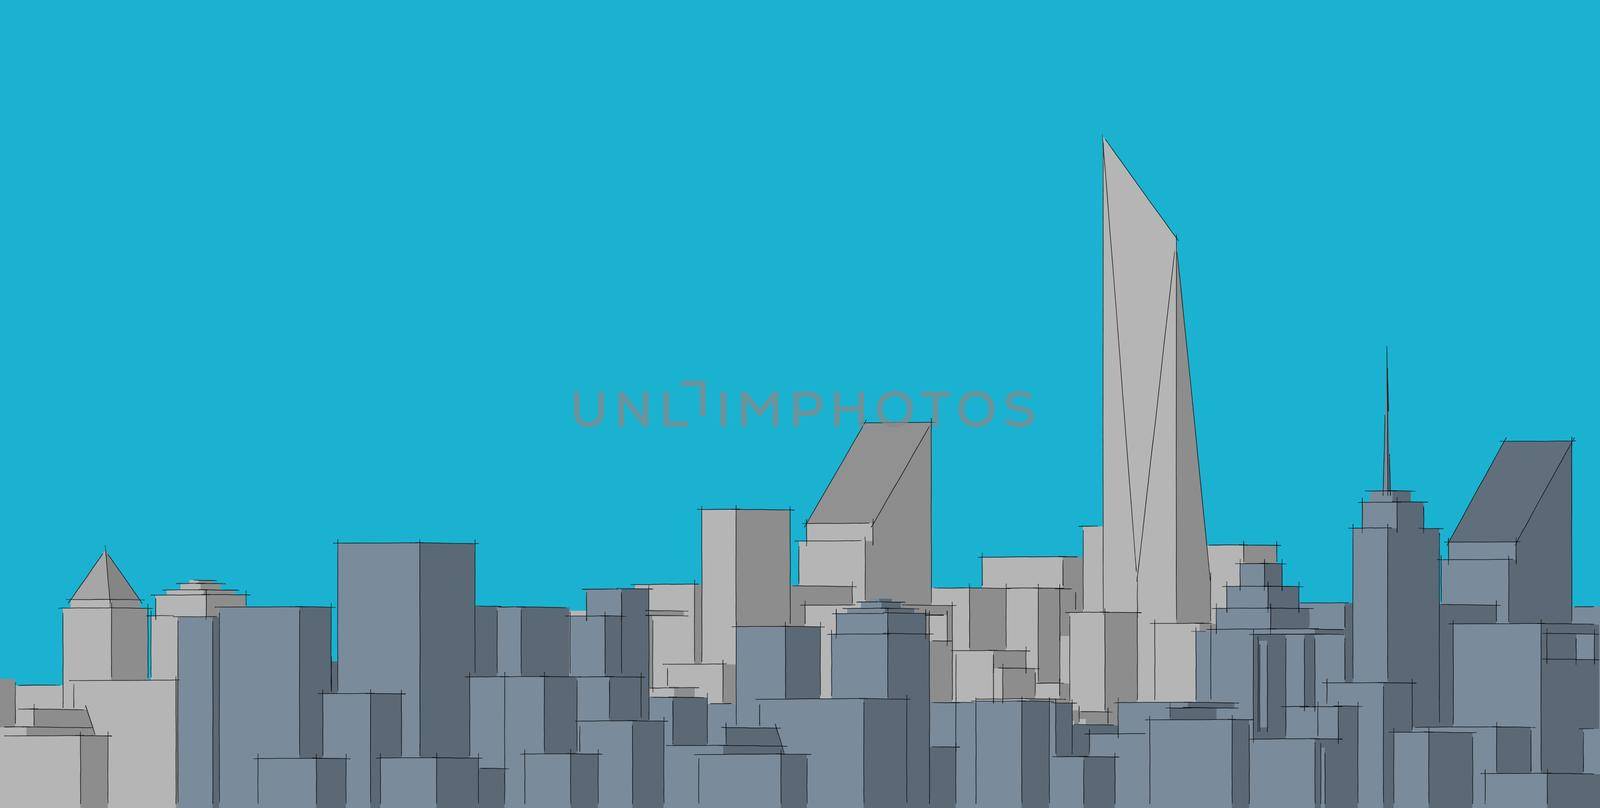 Abstract architectral drawing sketch,city, panorama, 3d illustration